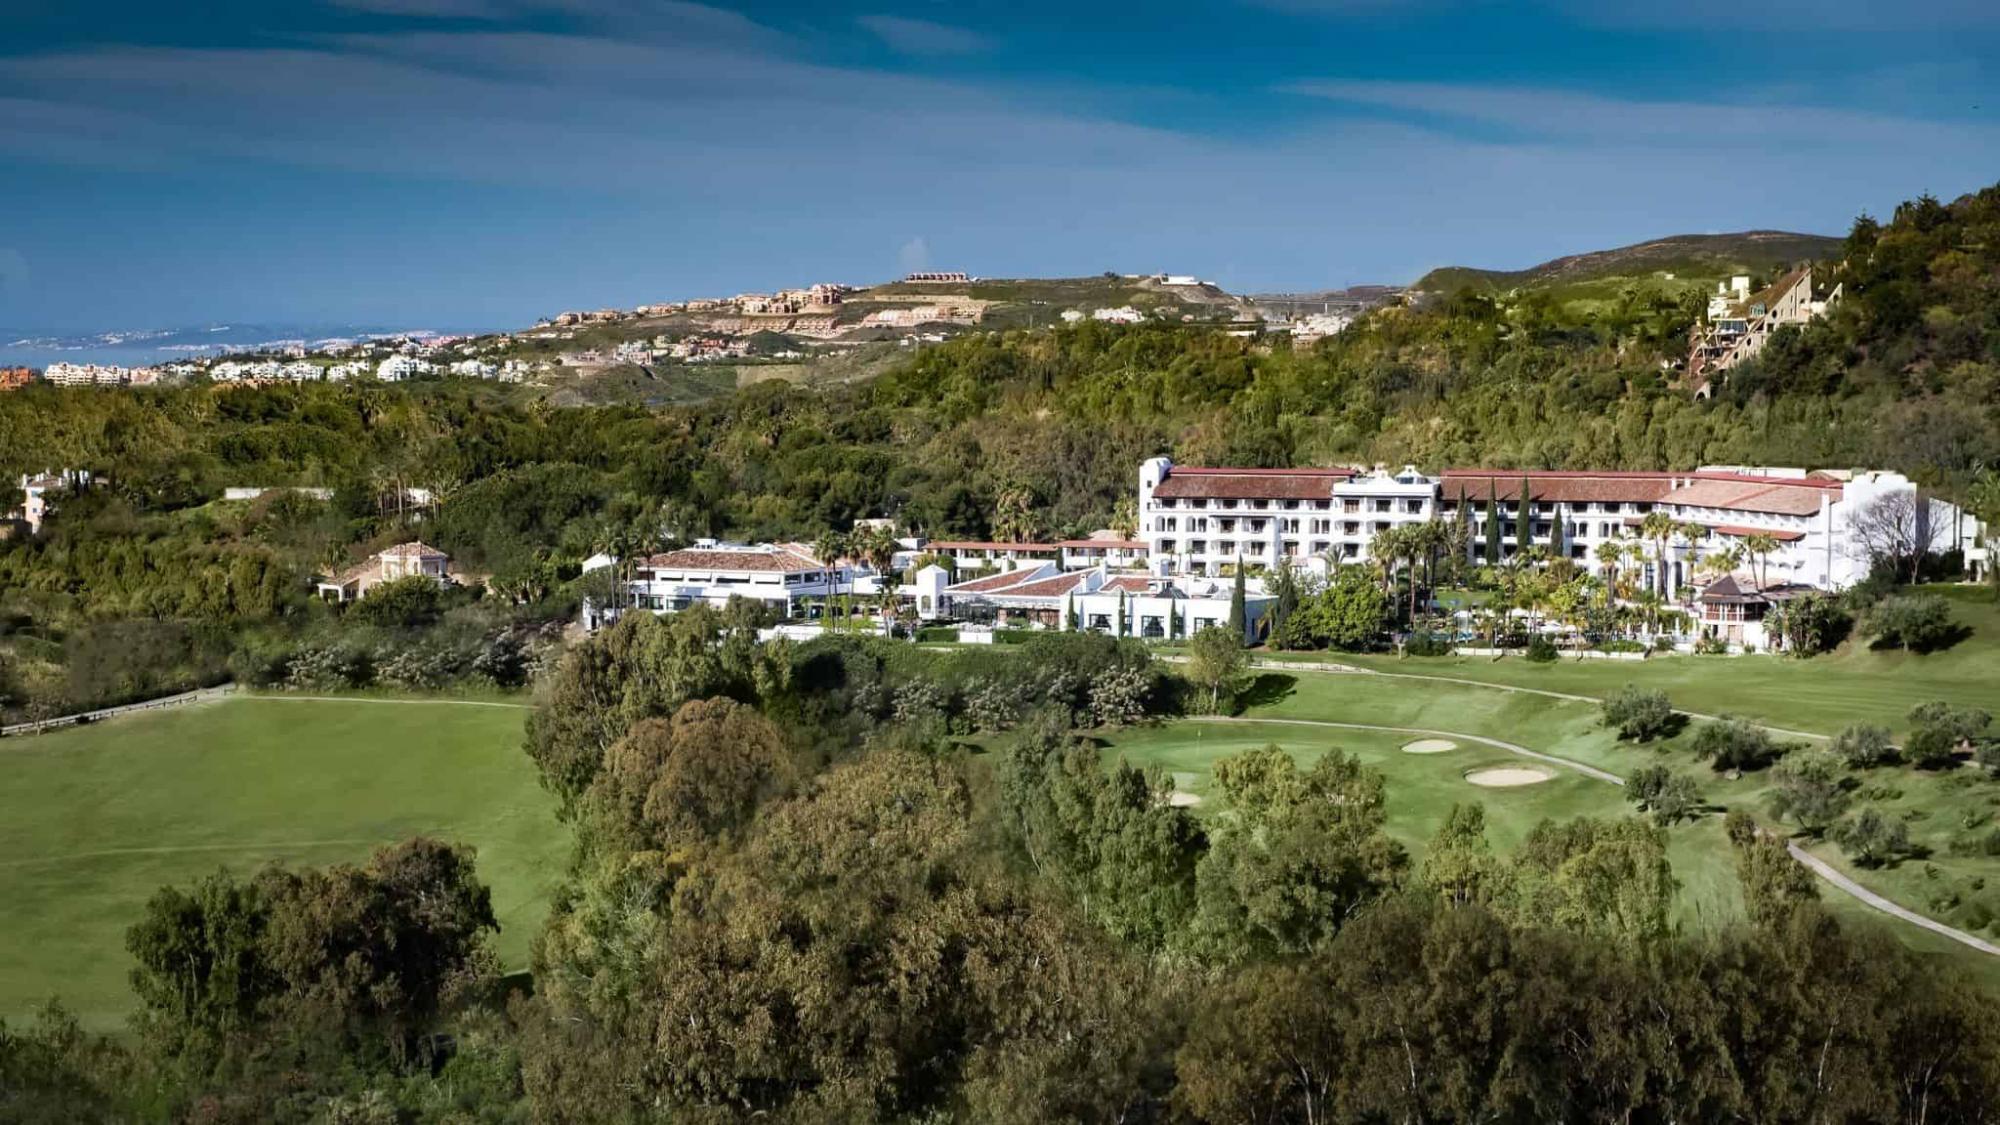 The Westin La Quinta Golf Resort's lovely hotel within dramatic Costa Del Sol.